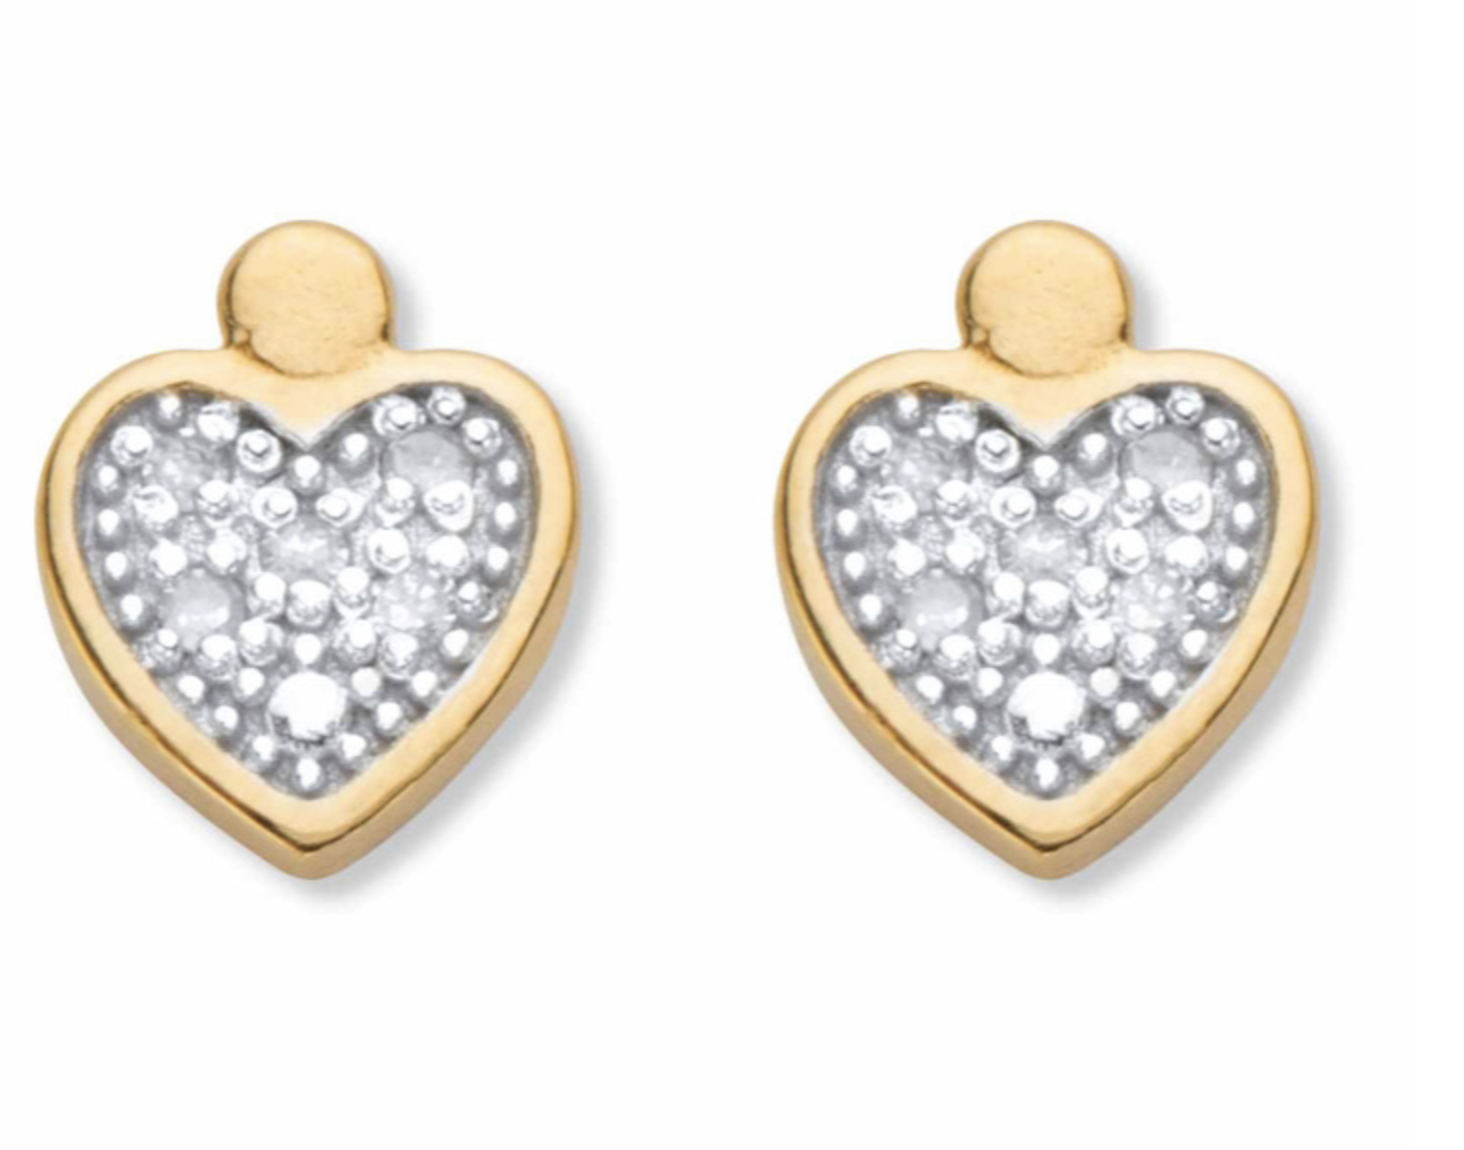 ROUND DIAMOND ACCENT HEART SHAPED STUDS EARRINGS 18K GOLD STERLING SILVER - £78.65 GBP